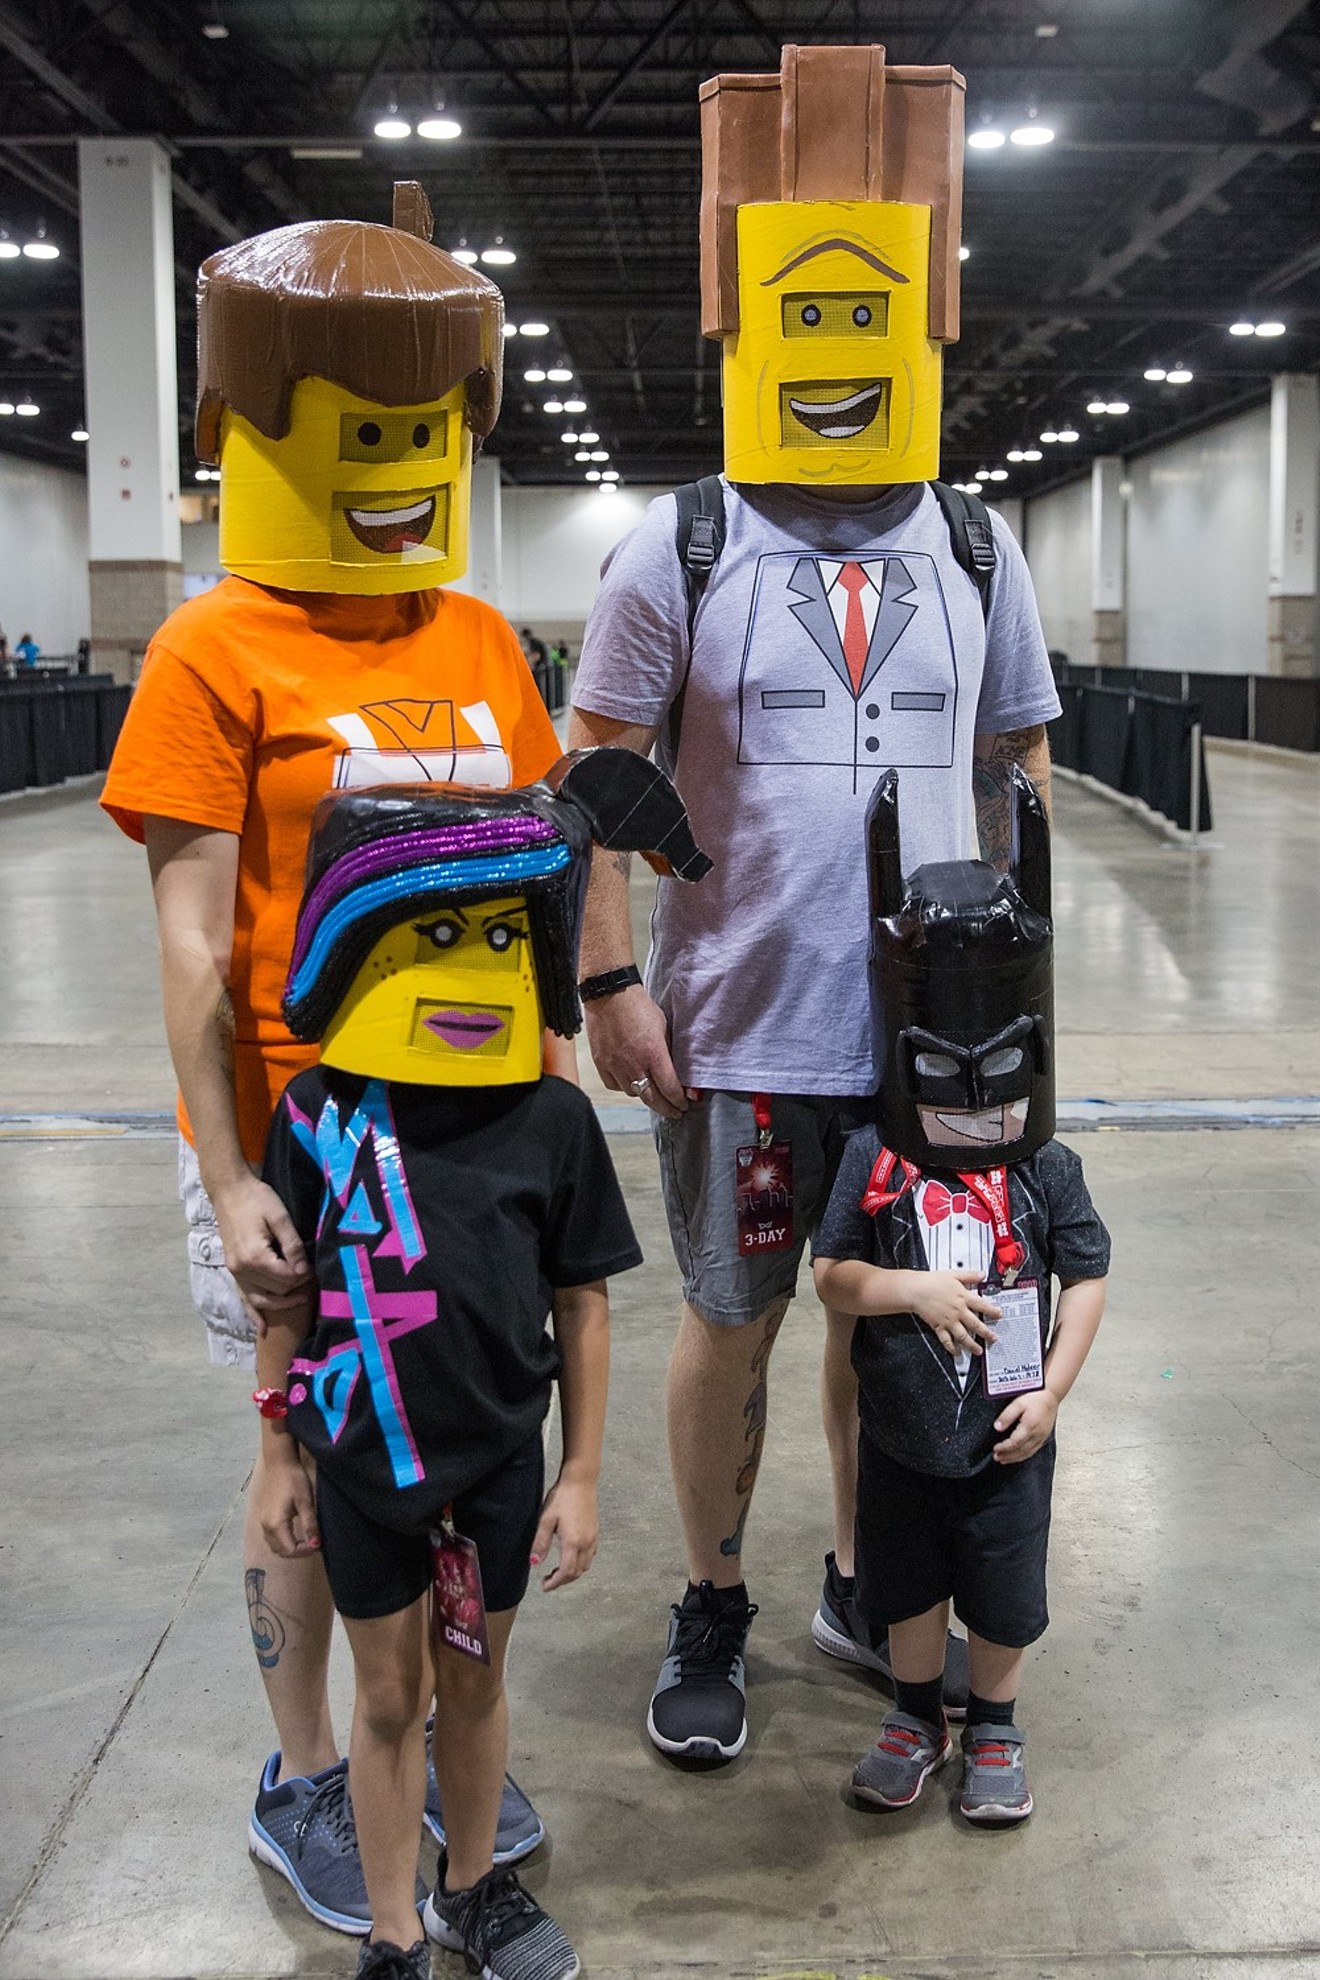 Everything is AWESOME (at Colorado nerd conventions).